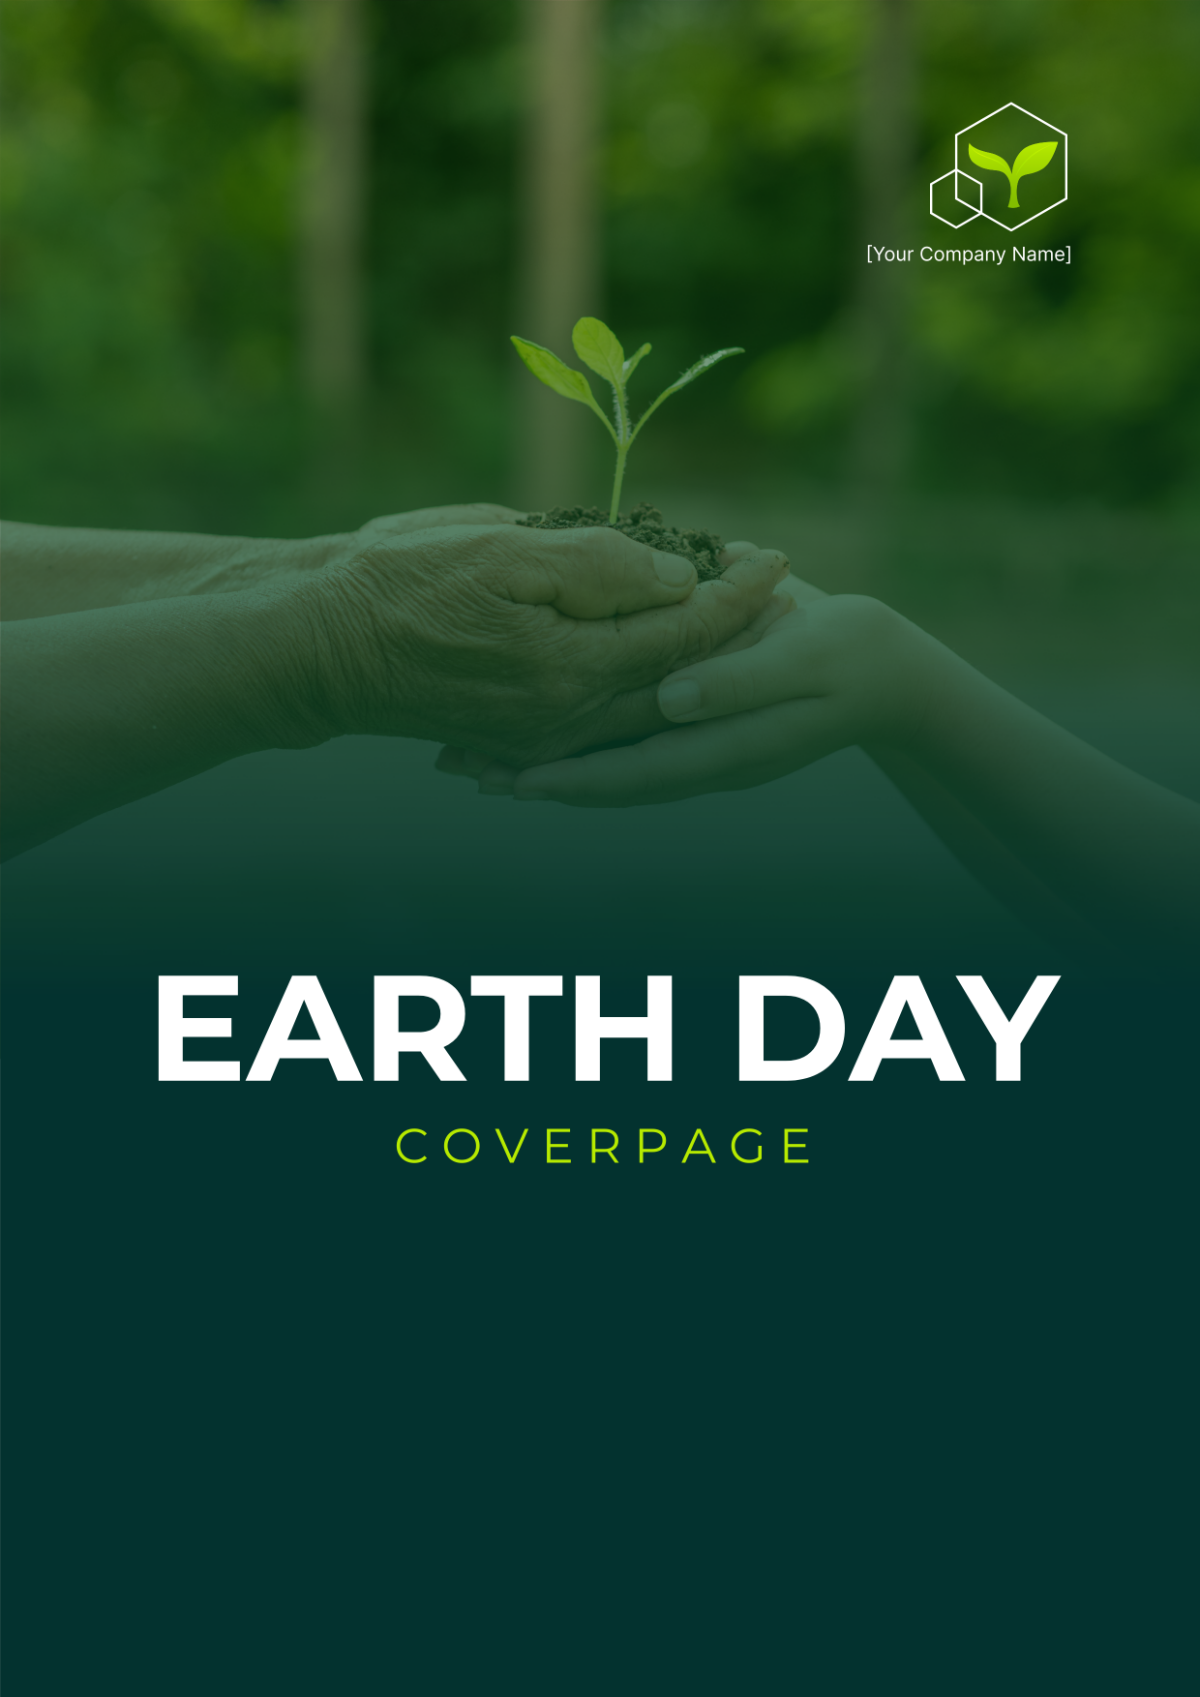 Earth Day Cover Page Template